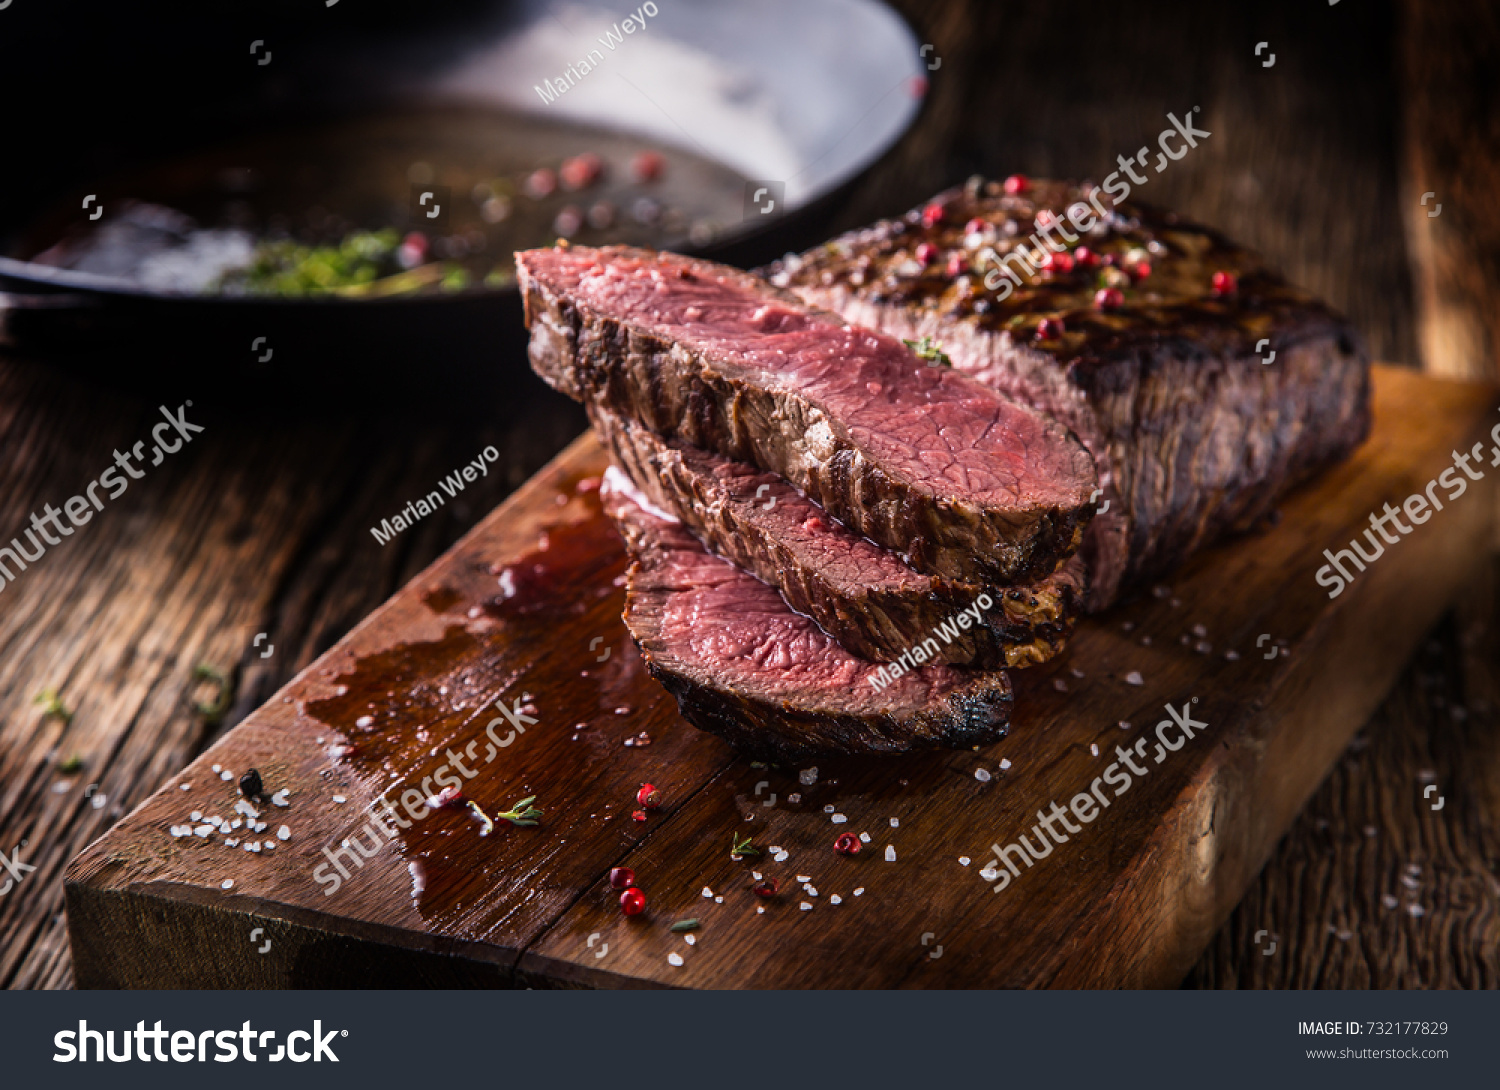 Juicy medium Beef Rib Eye steak slices in pan on wooden board with fork and knife herbs spices and salt. #732177829